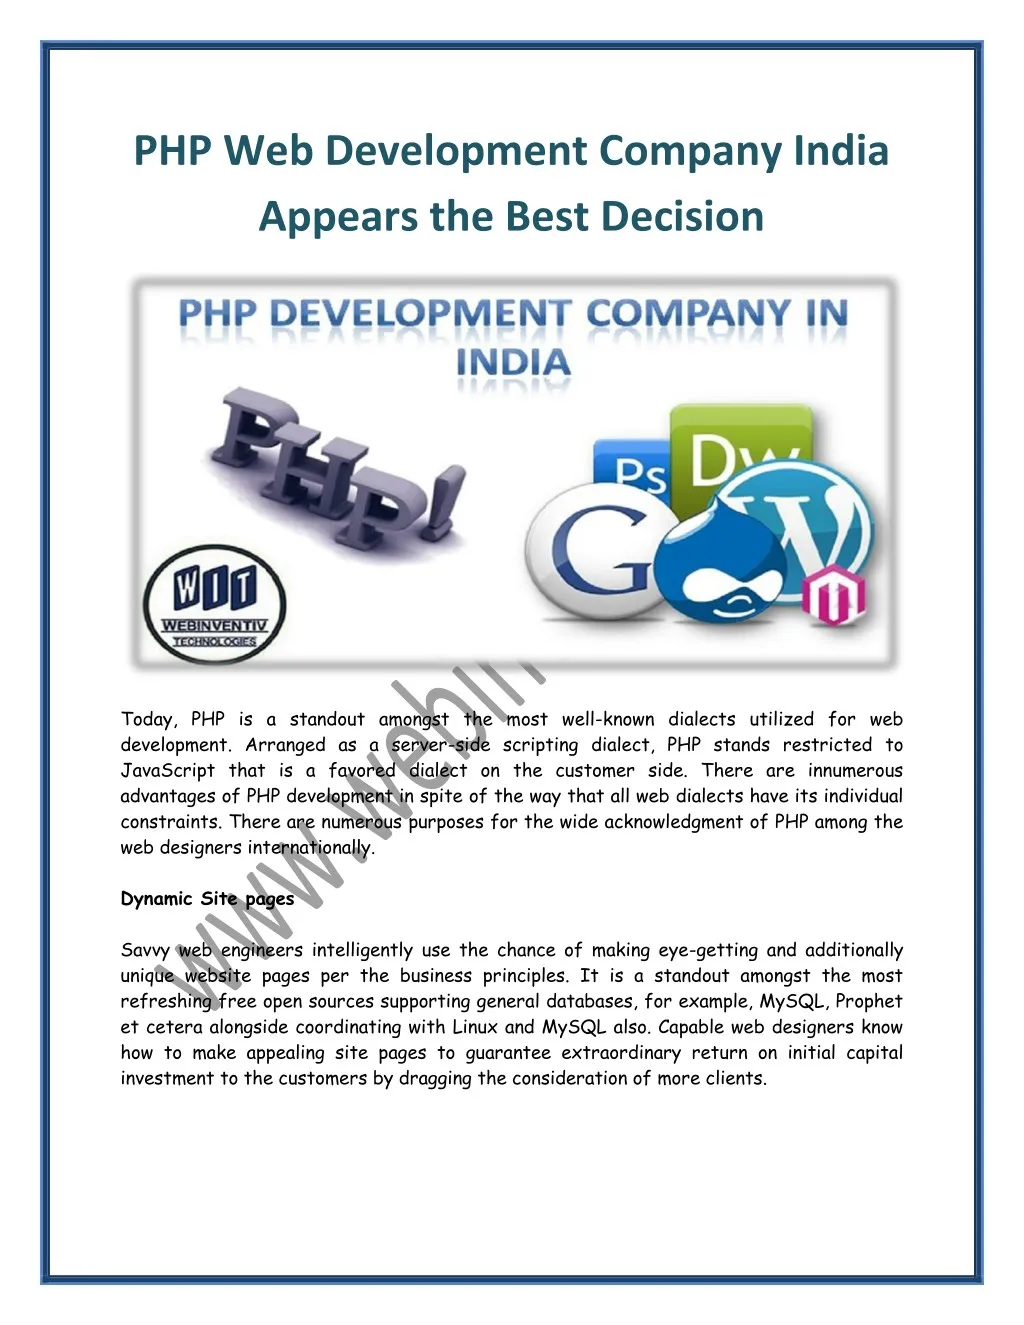 php web development company india appears